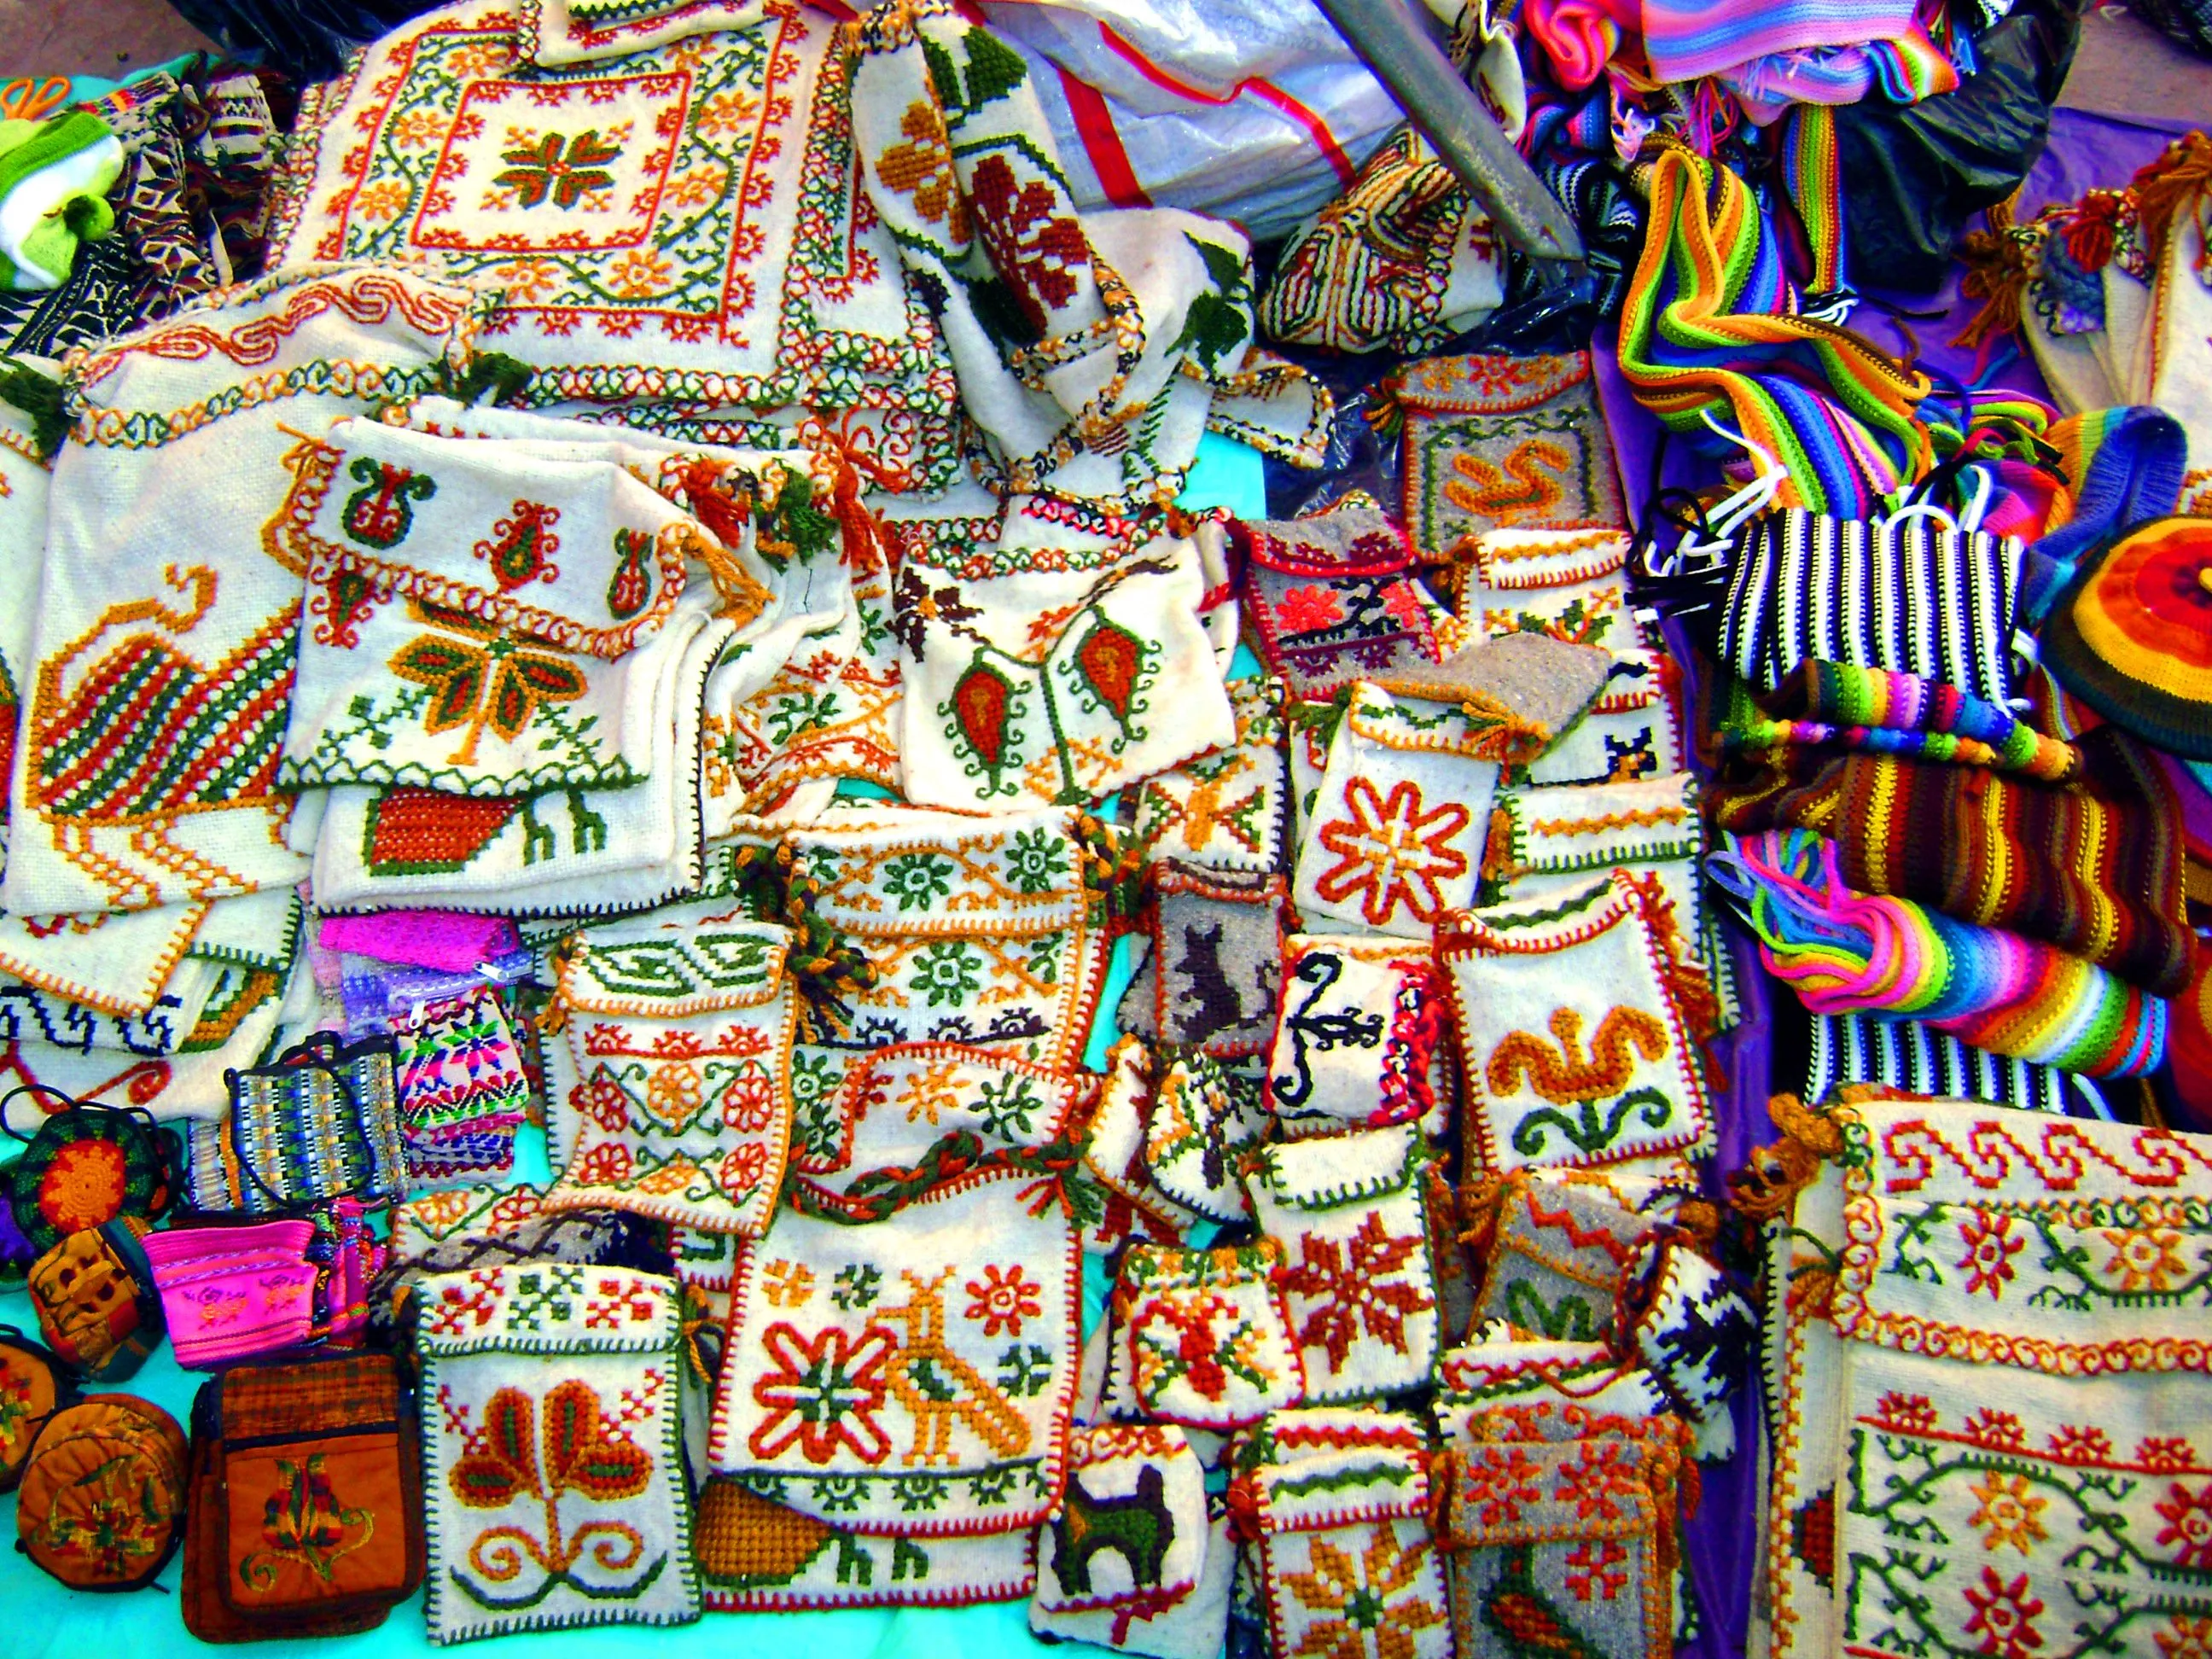 Tourist shopping for handicrafts - knitted scarves, bags and towels